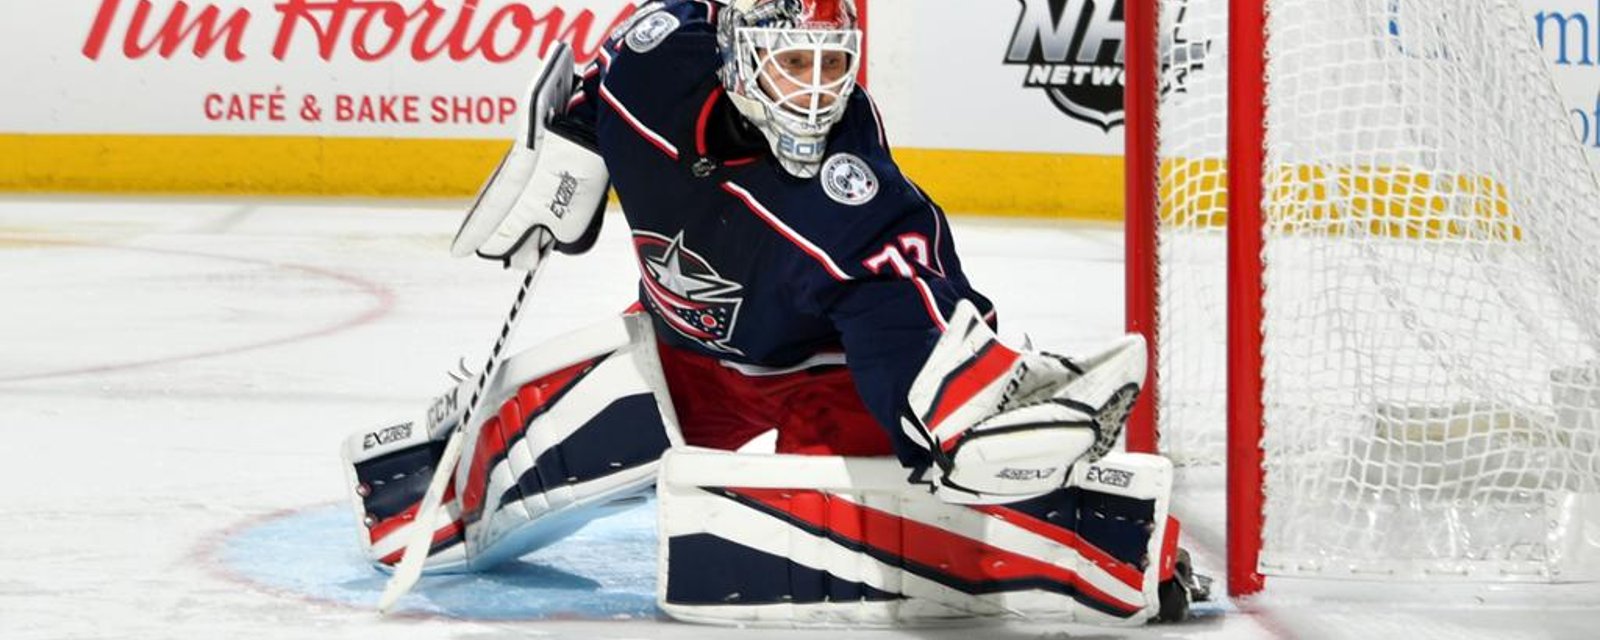 Breaking: Blue Jackets suspend star goalie Bobrovsky for mysterious “incident”